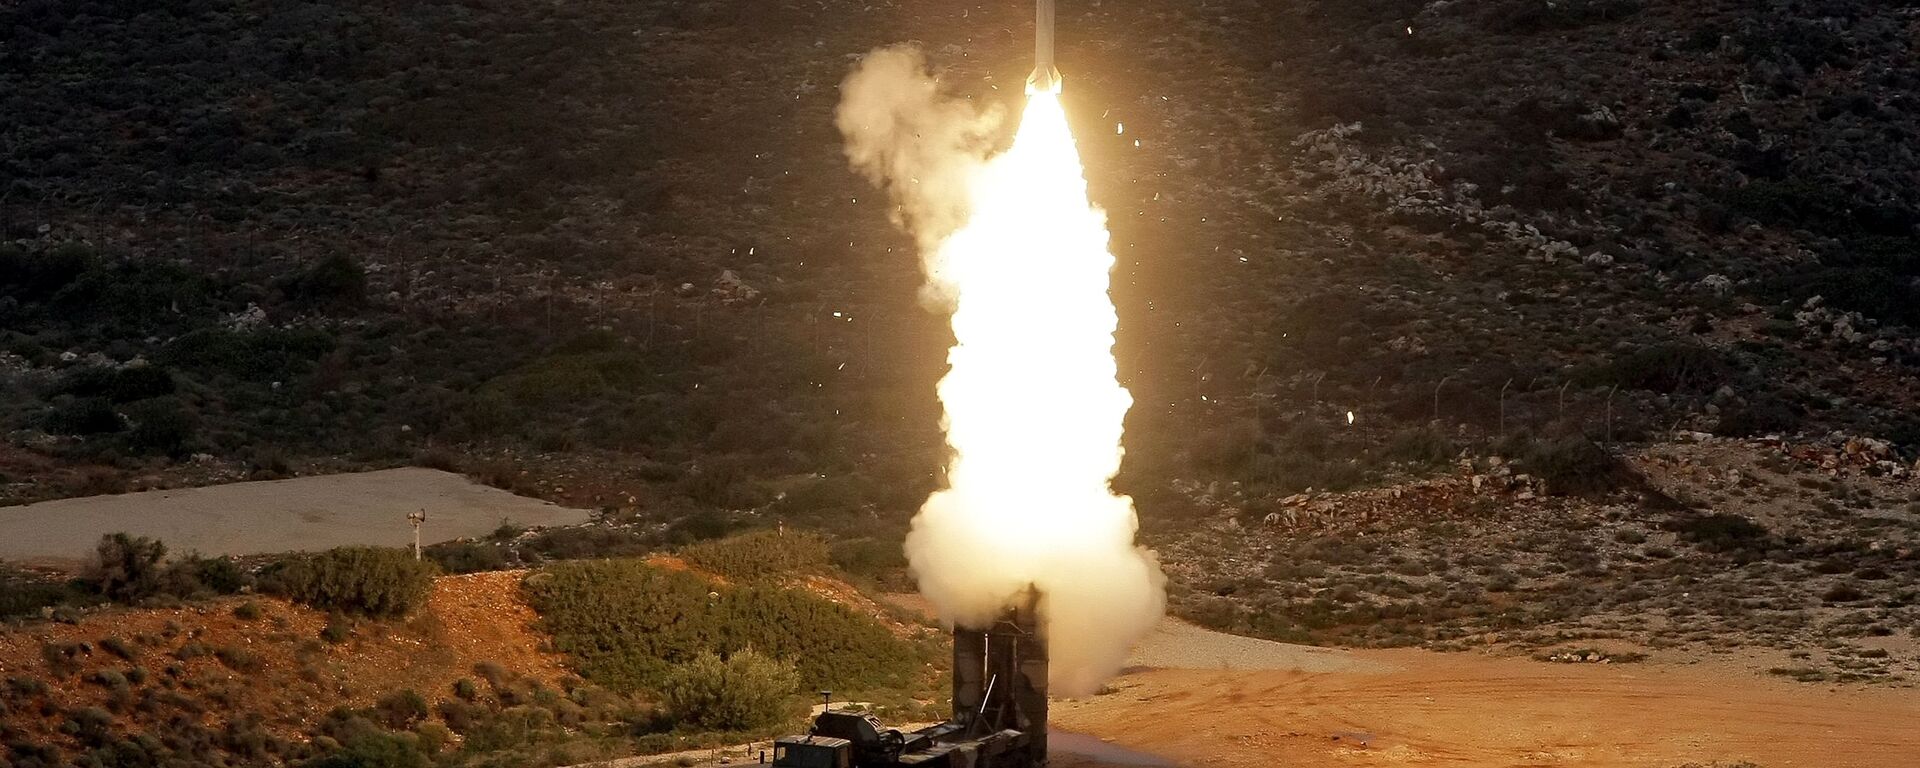 An S-300 PMU-1 anti-aircraft missile launches during a Greek army military exercise near Chania on the island of Crete on December 13, 2013 - Sputnik International, 1920, 10.02.2021